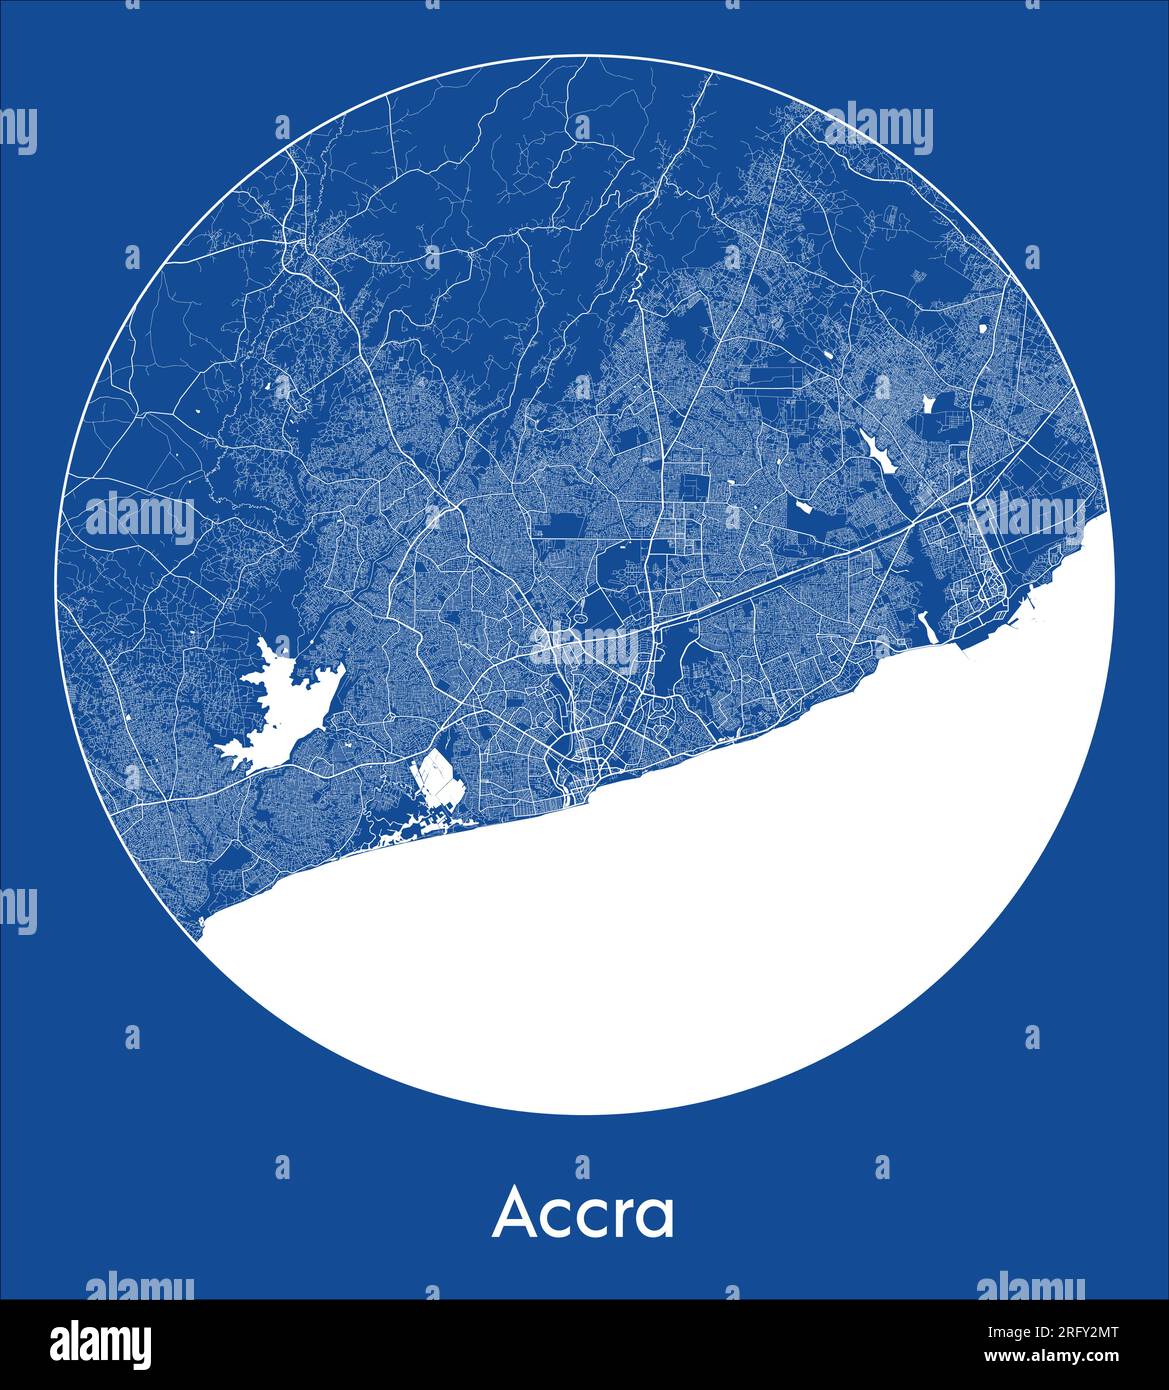 City Map Accra Ghana Africa blue print round Circle vector illustration Stock Vector